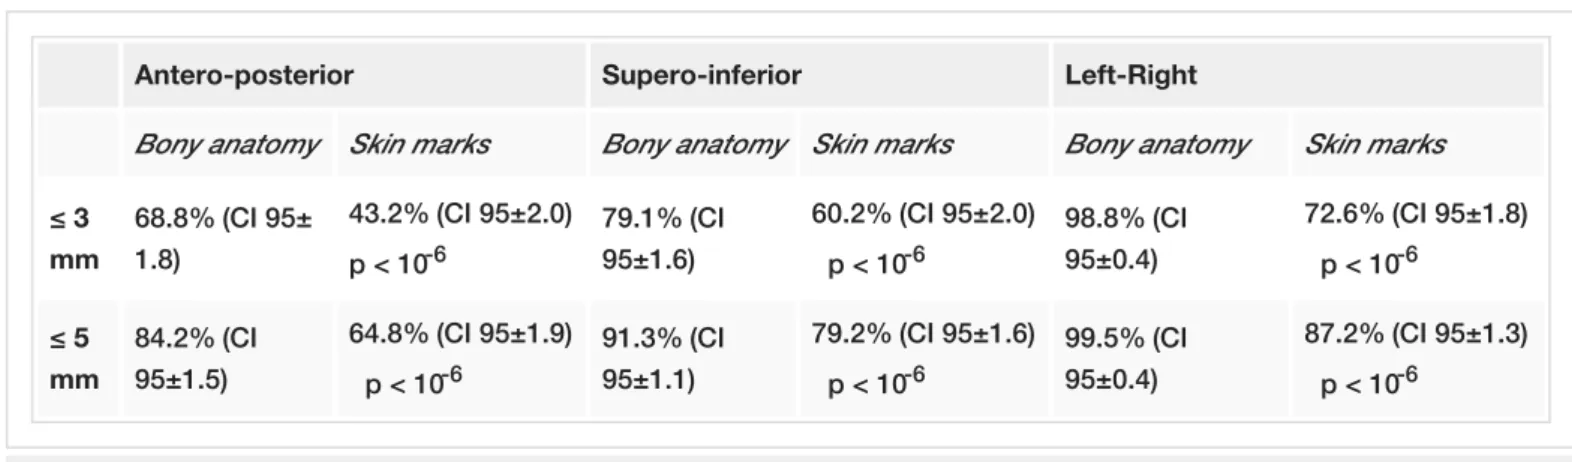 TABLE 1: Fiducial Intraprostatic Movements from Bony Anatomy and Skin Marks on